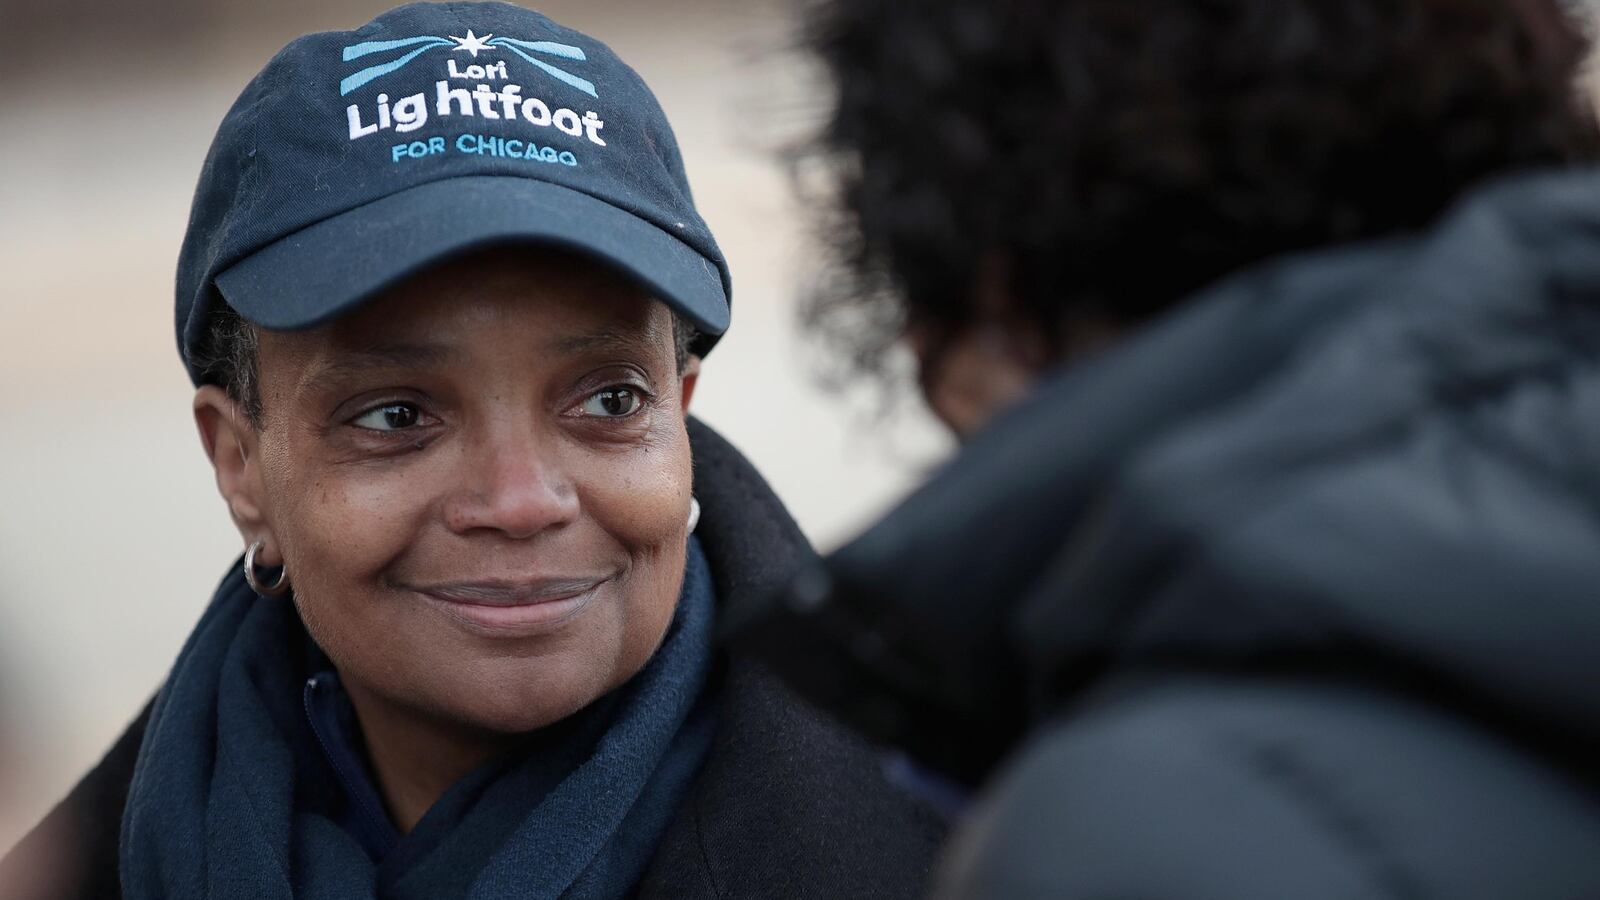 Lori Lightfoot, who will be Chicago's first black female mayor, spoke often about public education on the campaign trail. Now that she has been elected, what should she know about your school? Chalkbeat is asking in a brief survey.